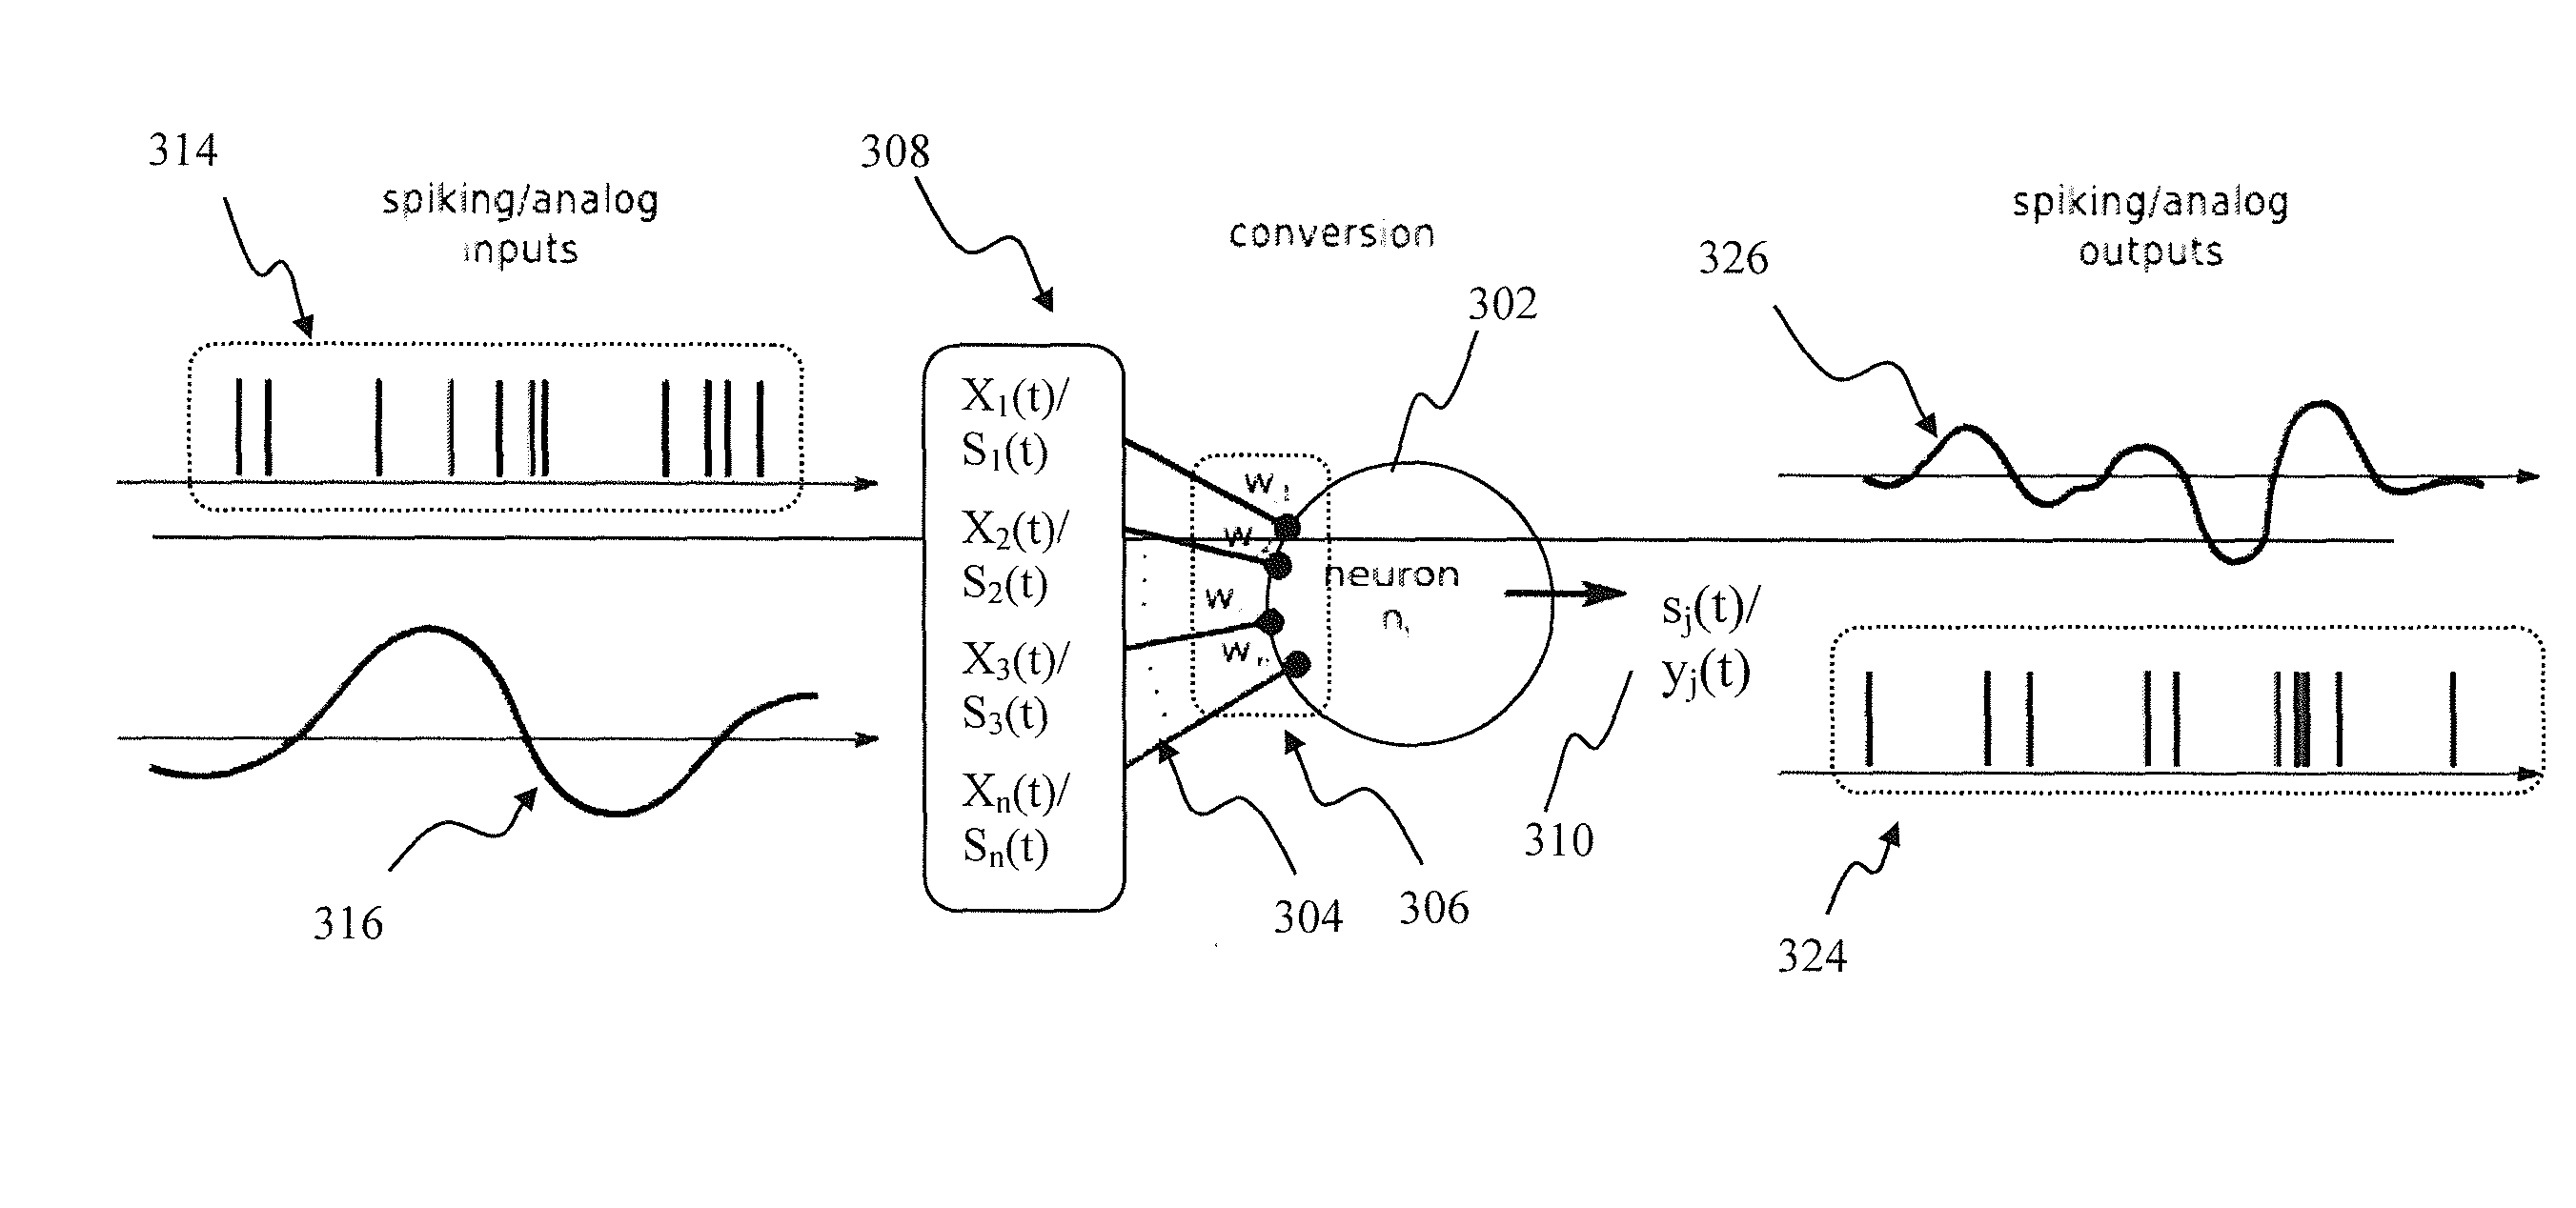 Apparatus and methods for implementing learning for analog and spiking signals in artificial neural networks